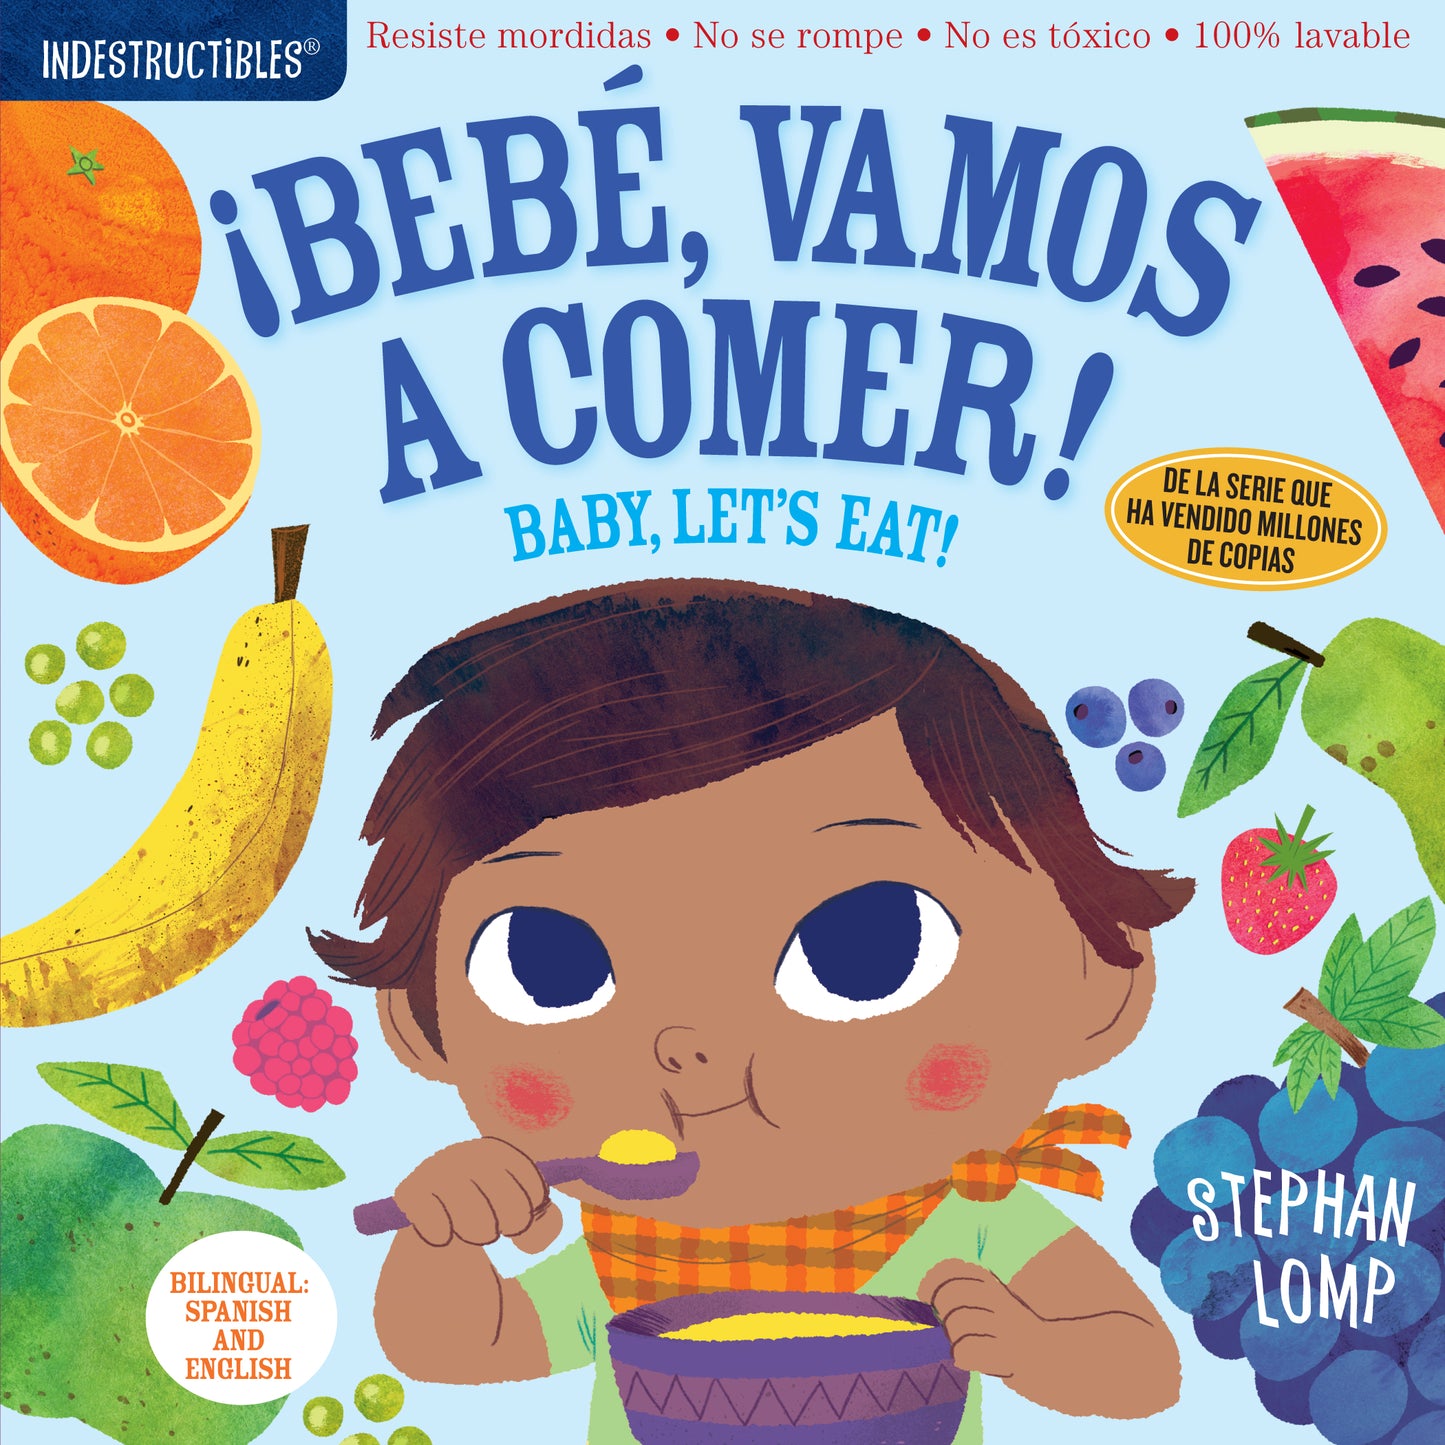 Indestructibles: Bebe, vamos a comer! / Baby, Let's Eat! : Chew Proof · Rip Proof · Nontoxic · 100% Washable (Book for Babies, Newborn Books, Safe to Chew)